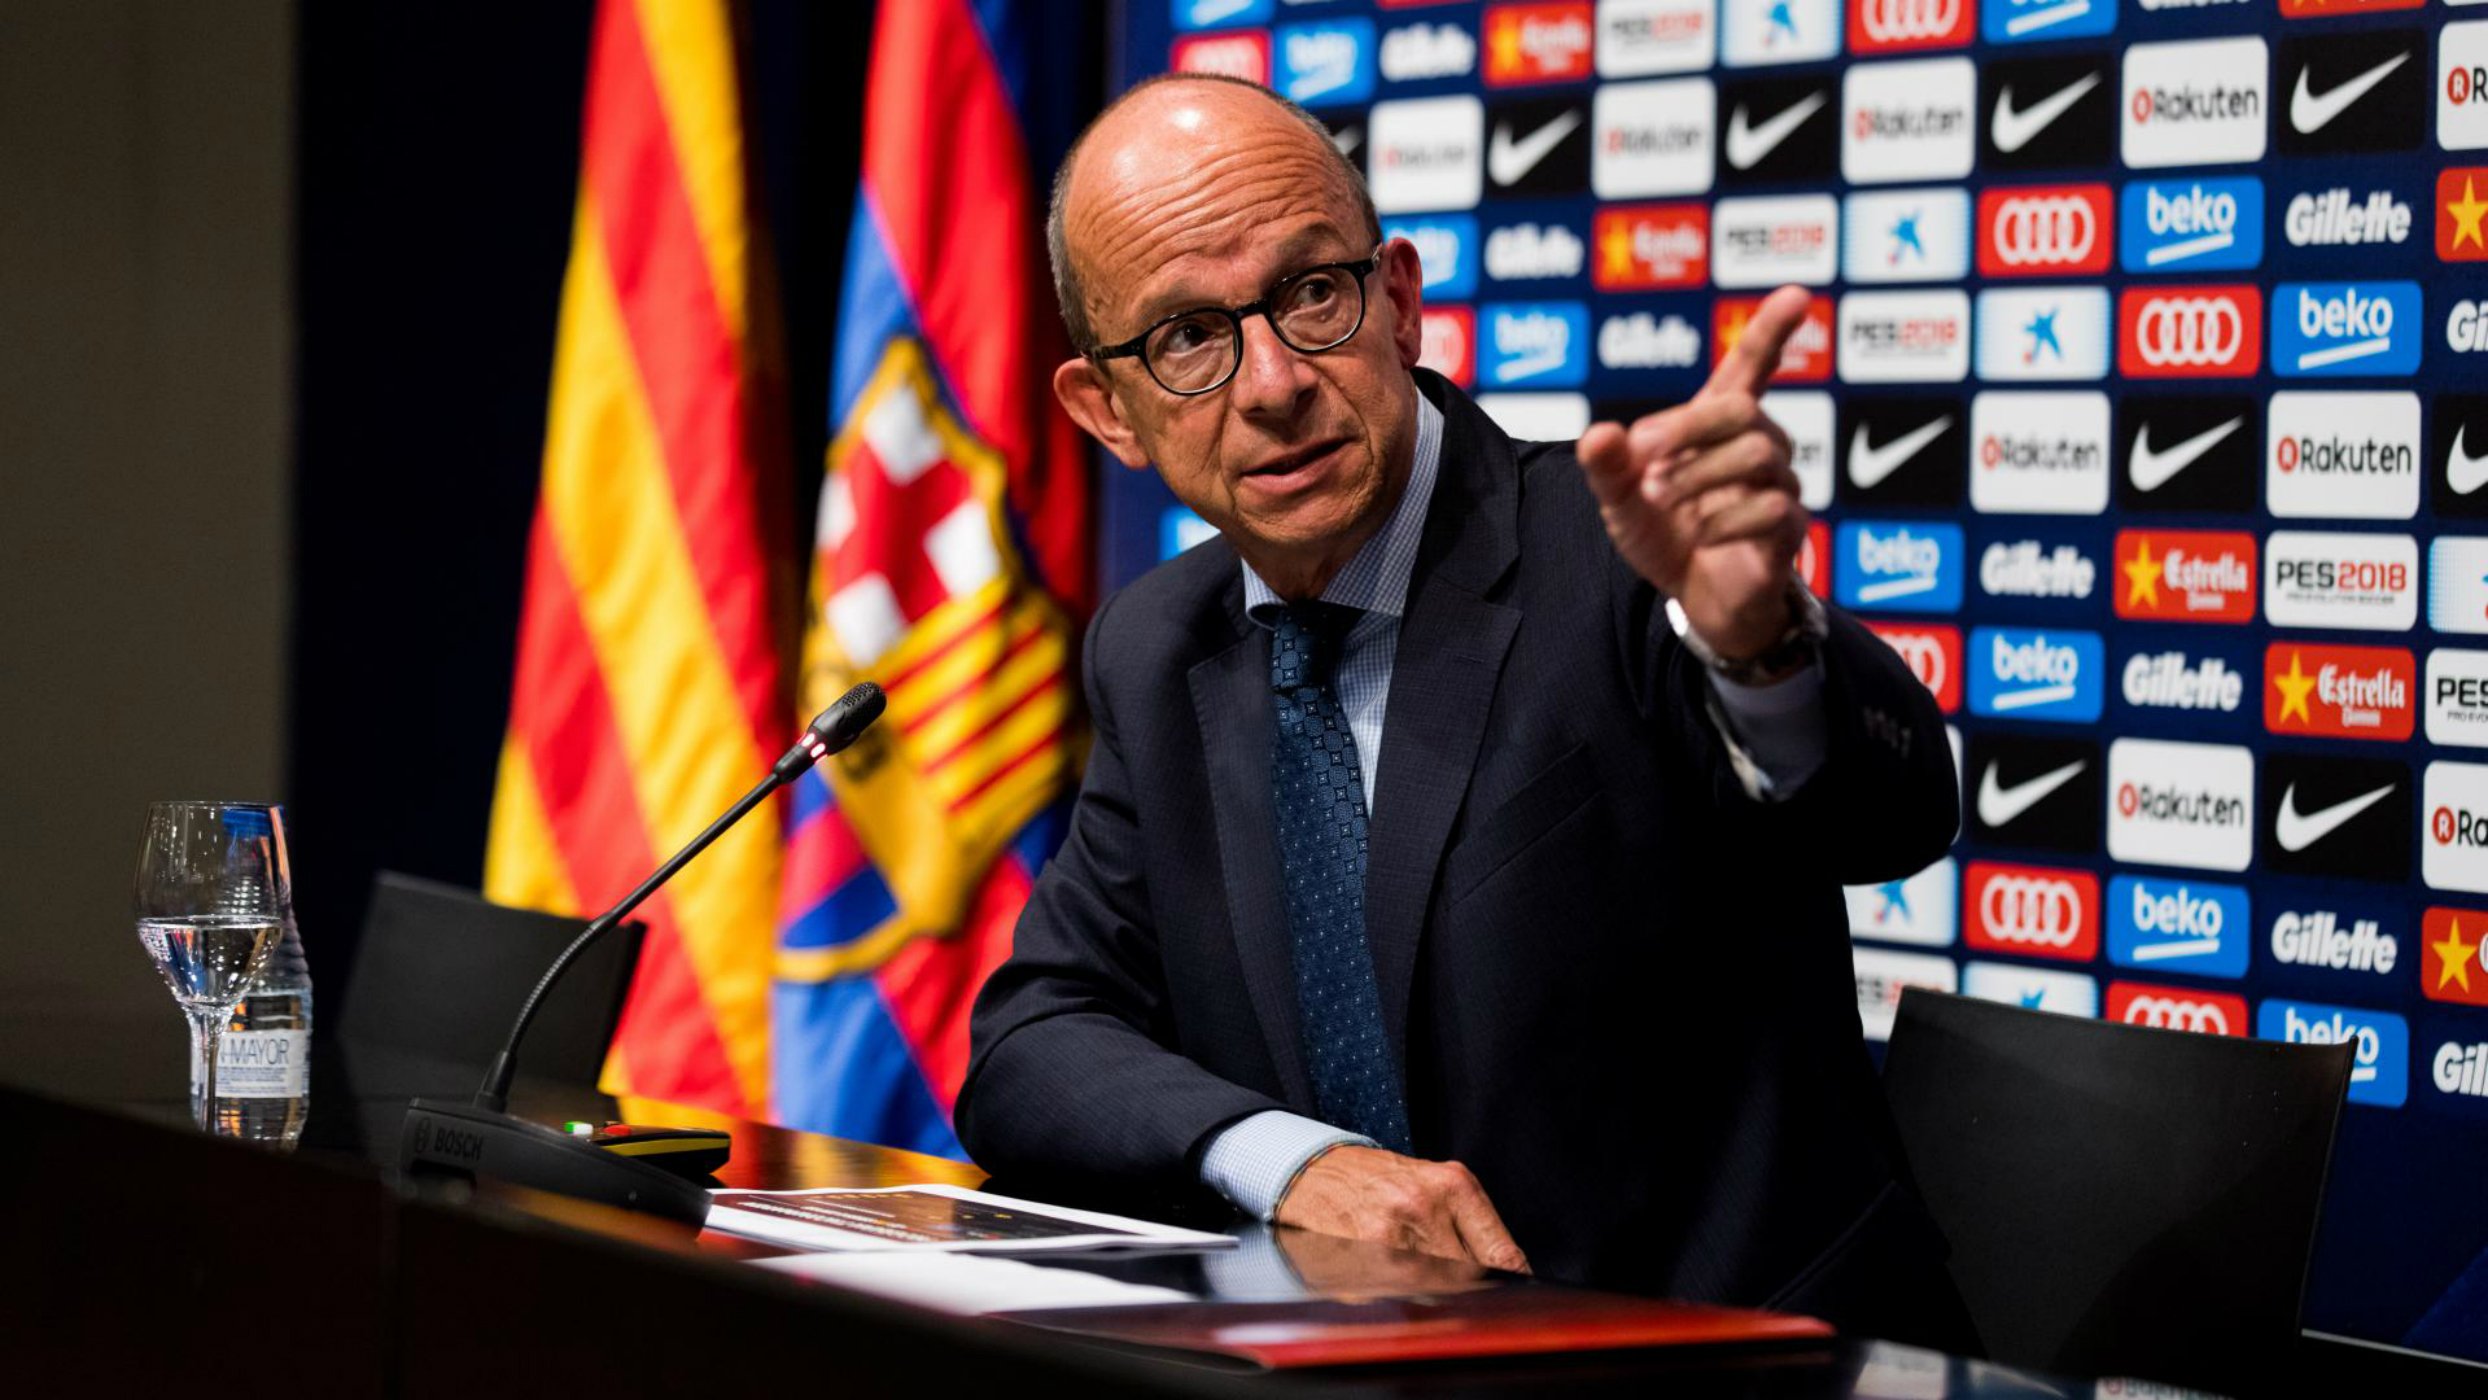 Barça's first vice-president: "El Clásico will be played"